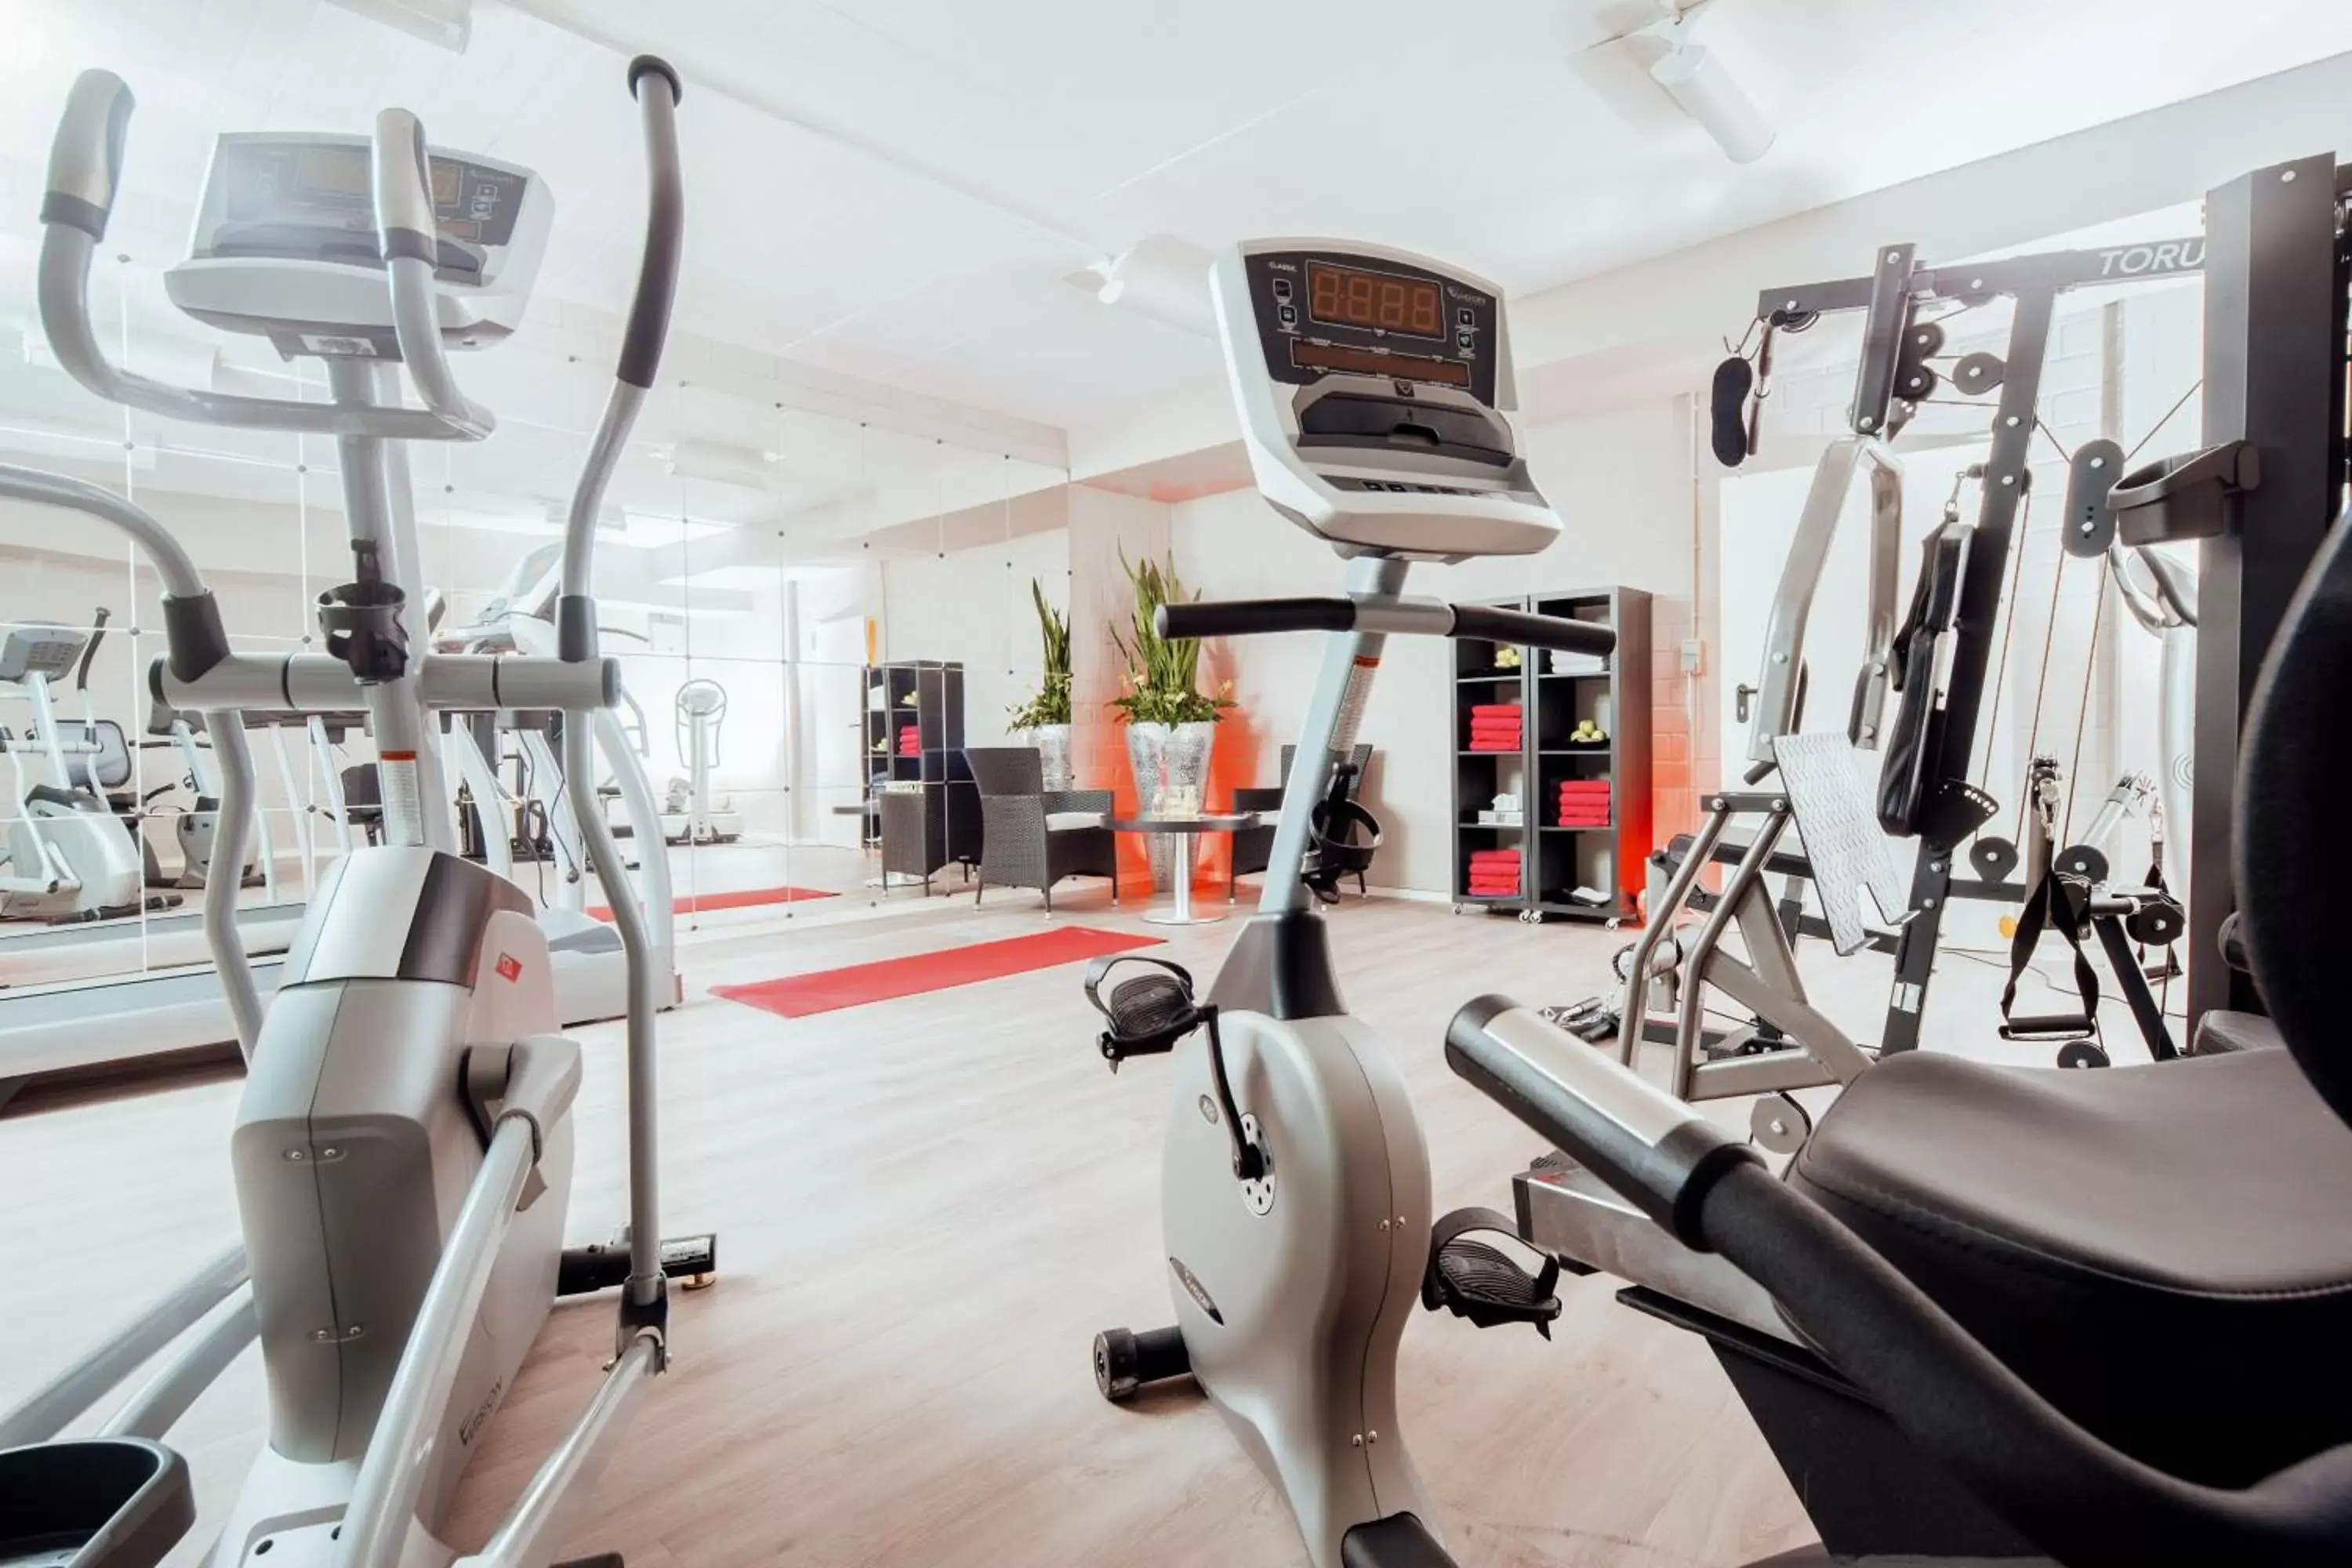 Fitness centre/facilities, Fitness Center/Facilities in Clostermanns Hof